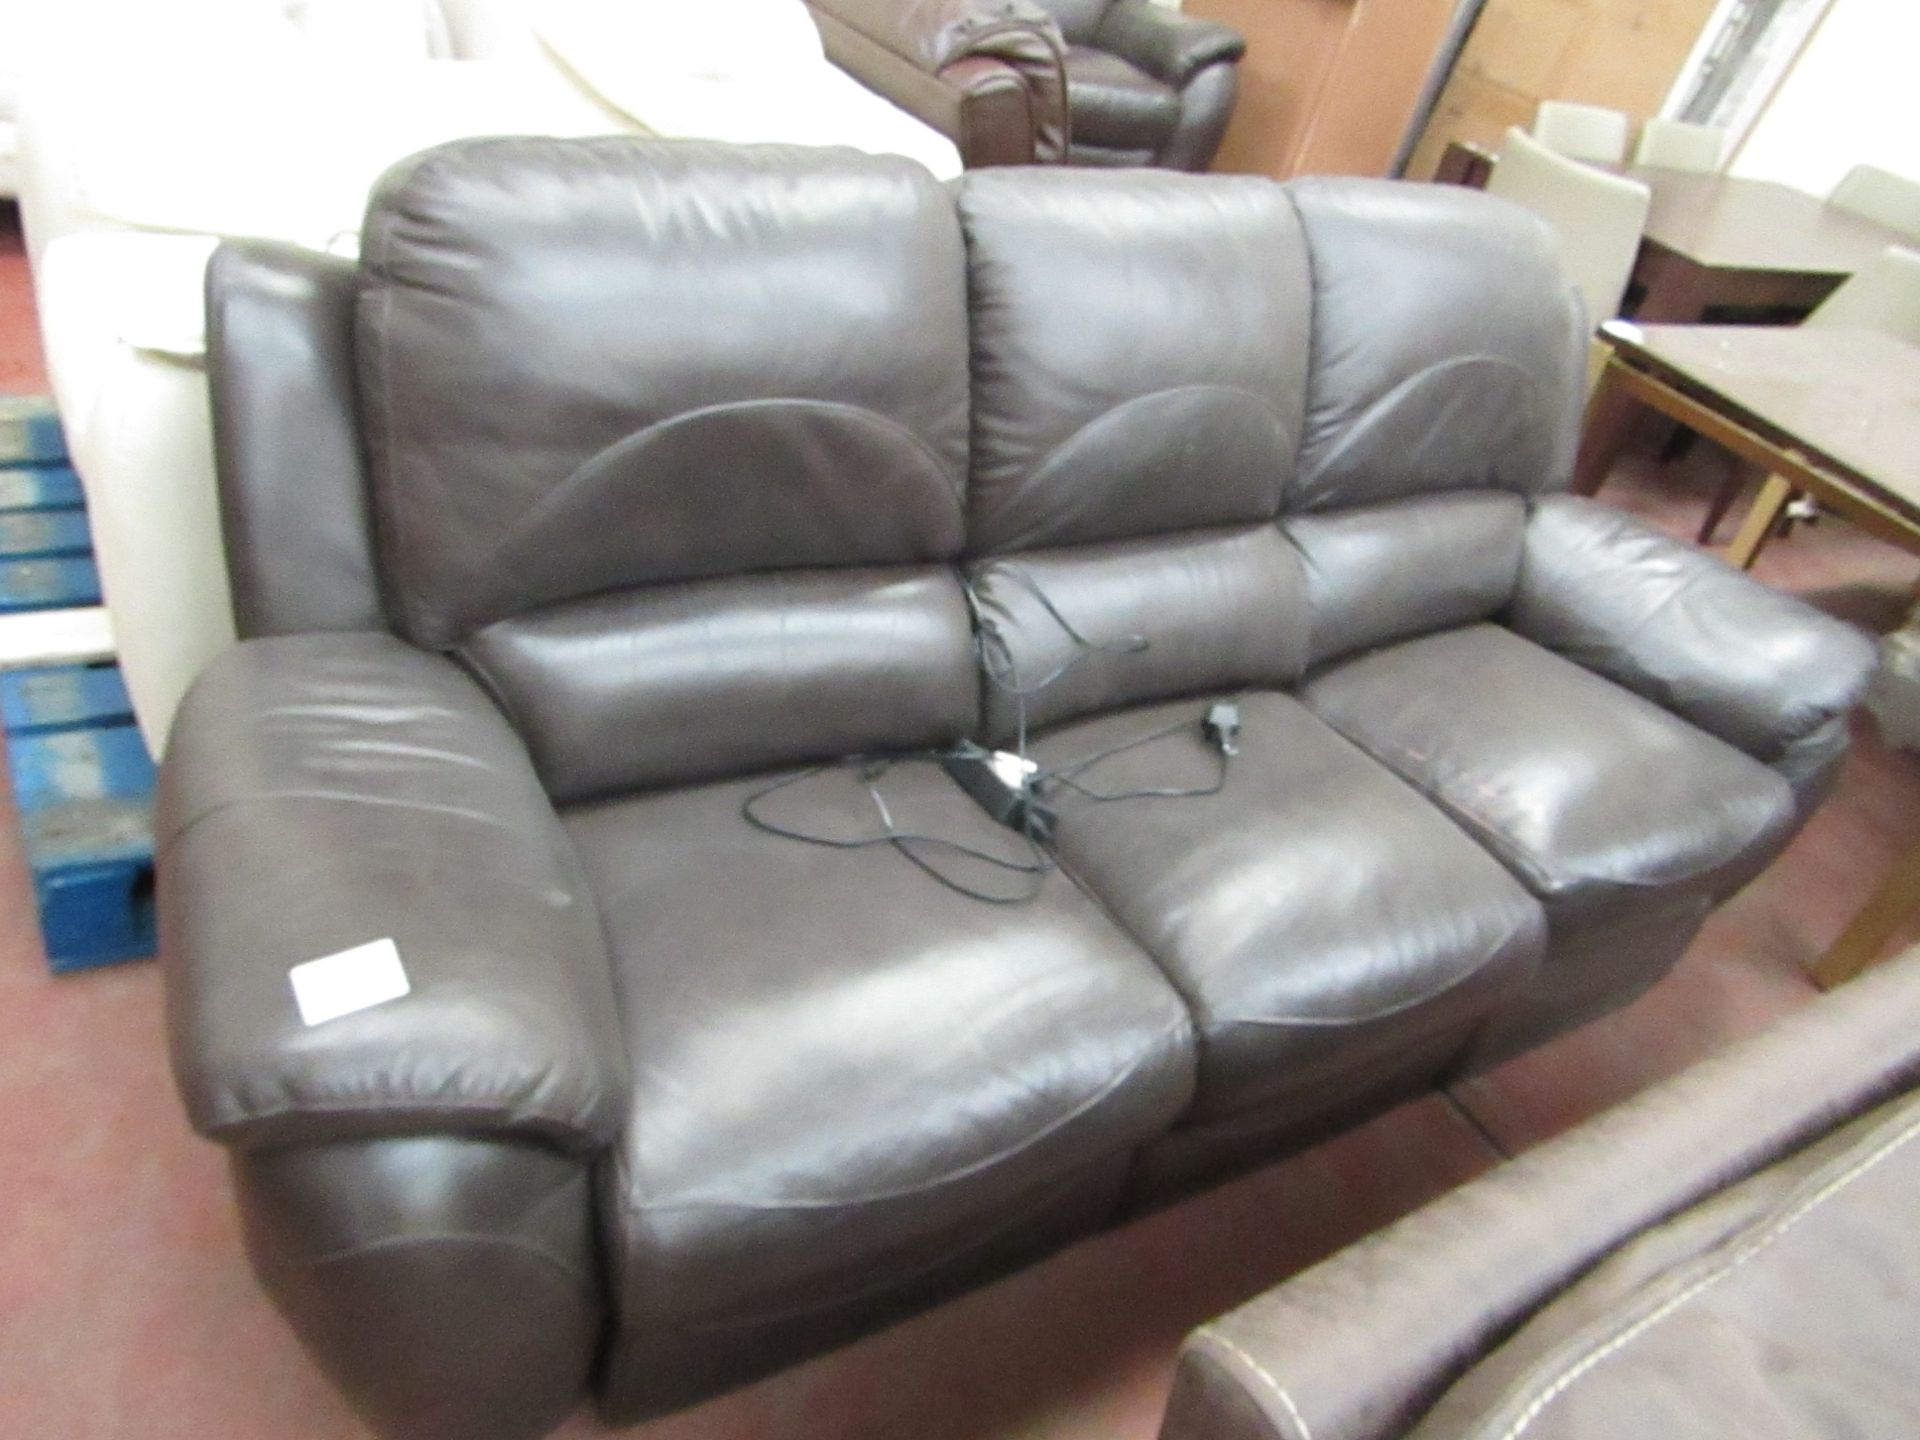 La Z Boy 3 seater electric reclining sofa, tested working one of the seats has discoloration on it